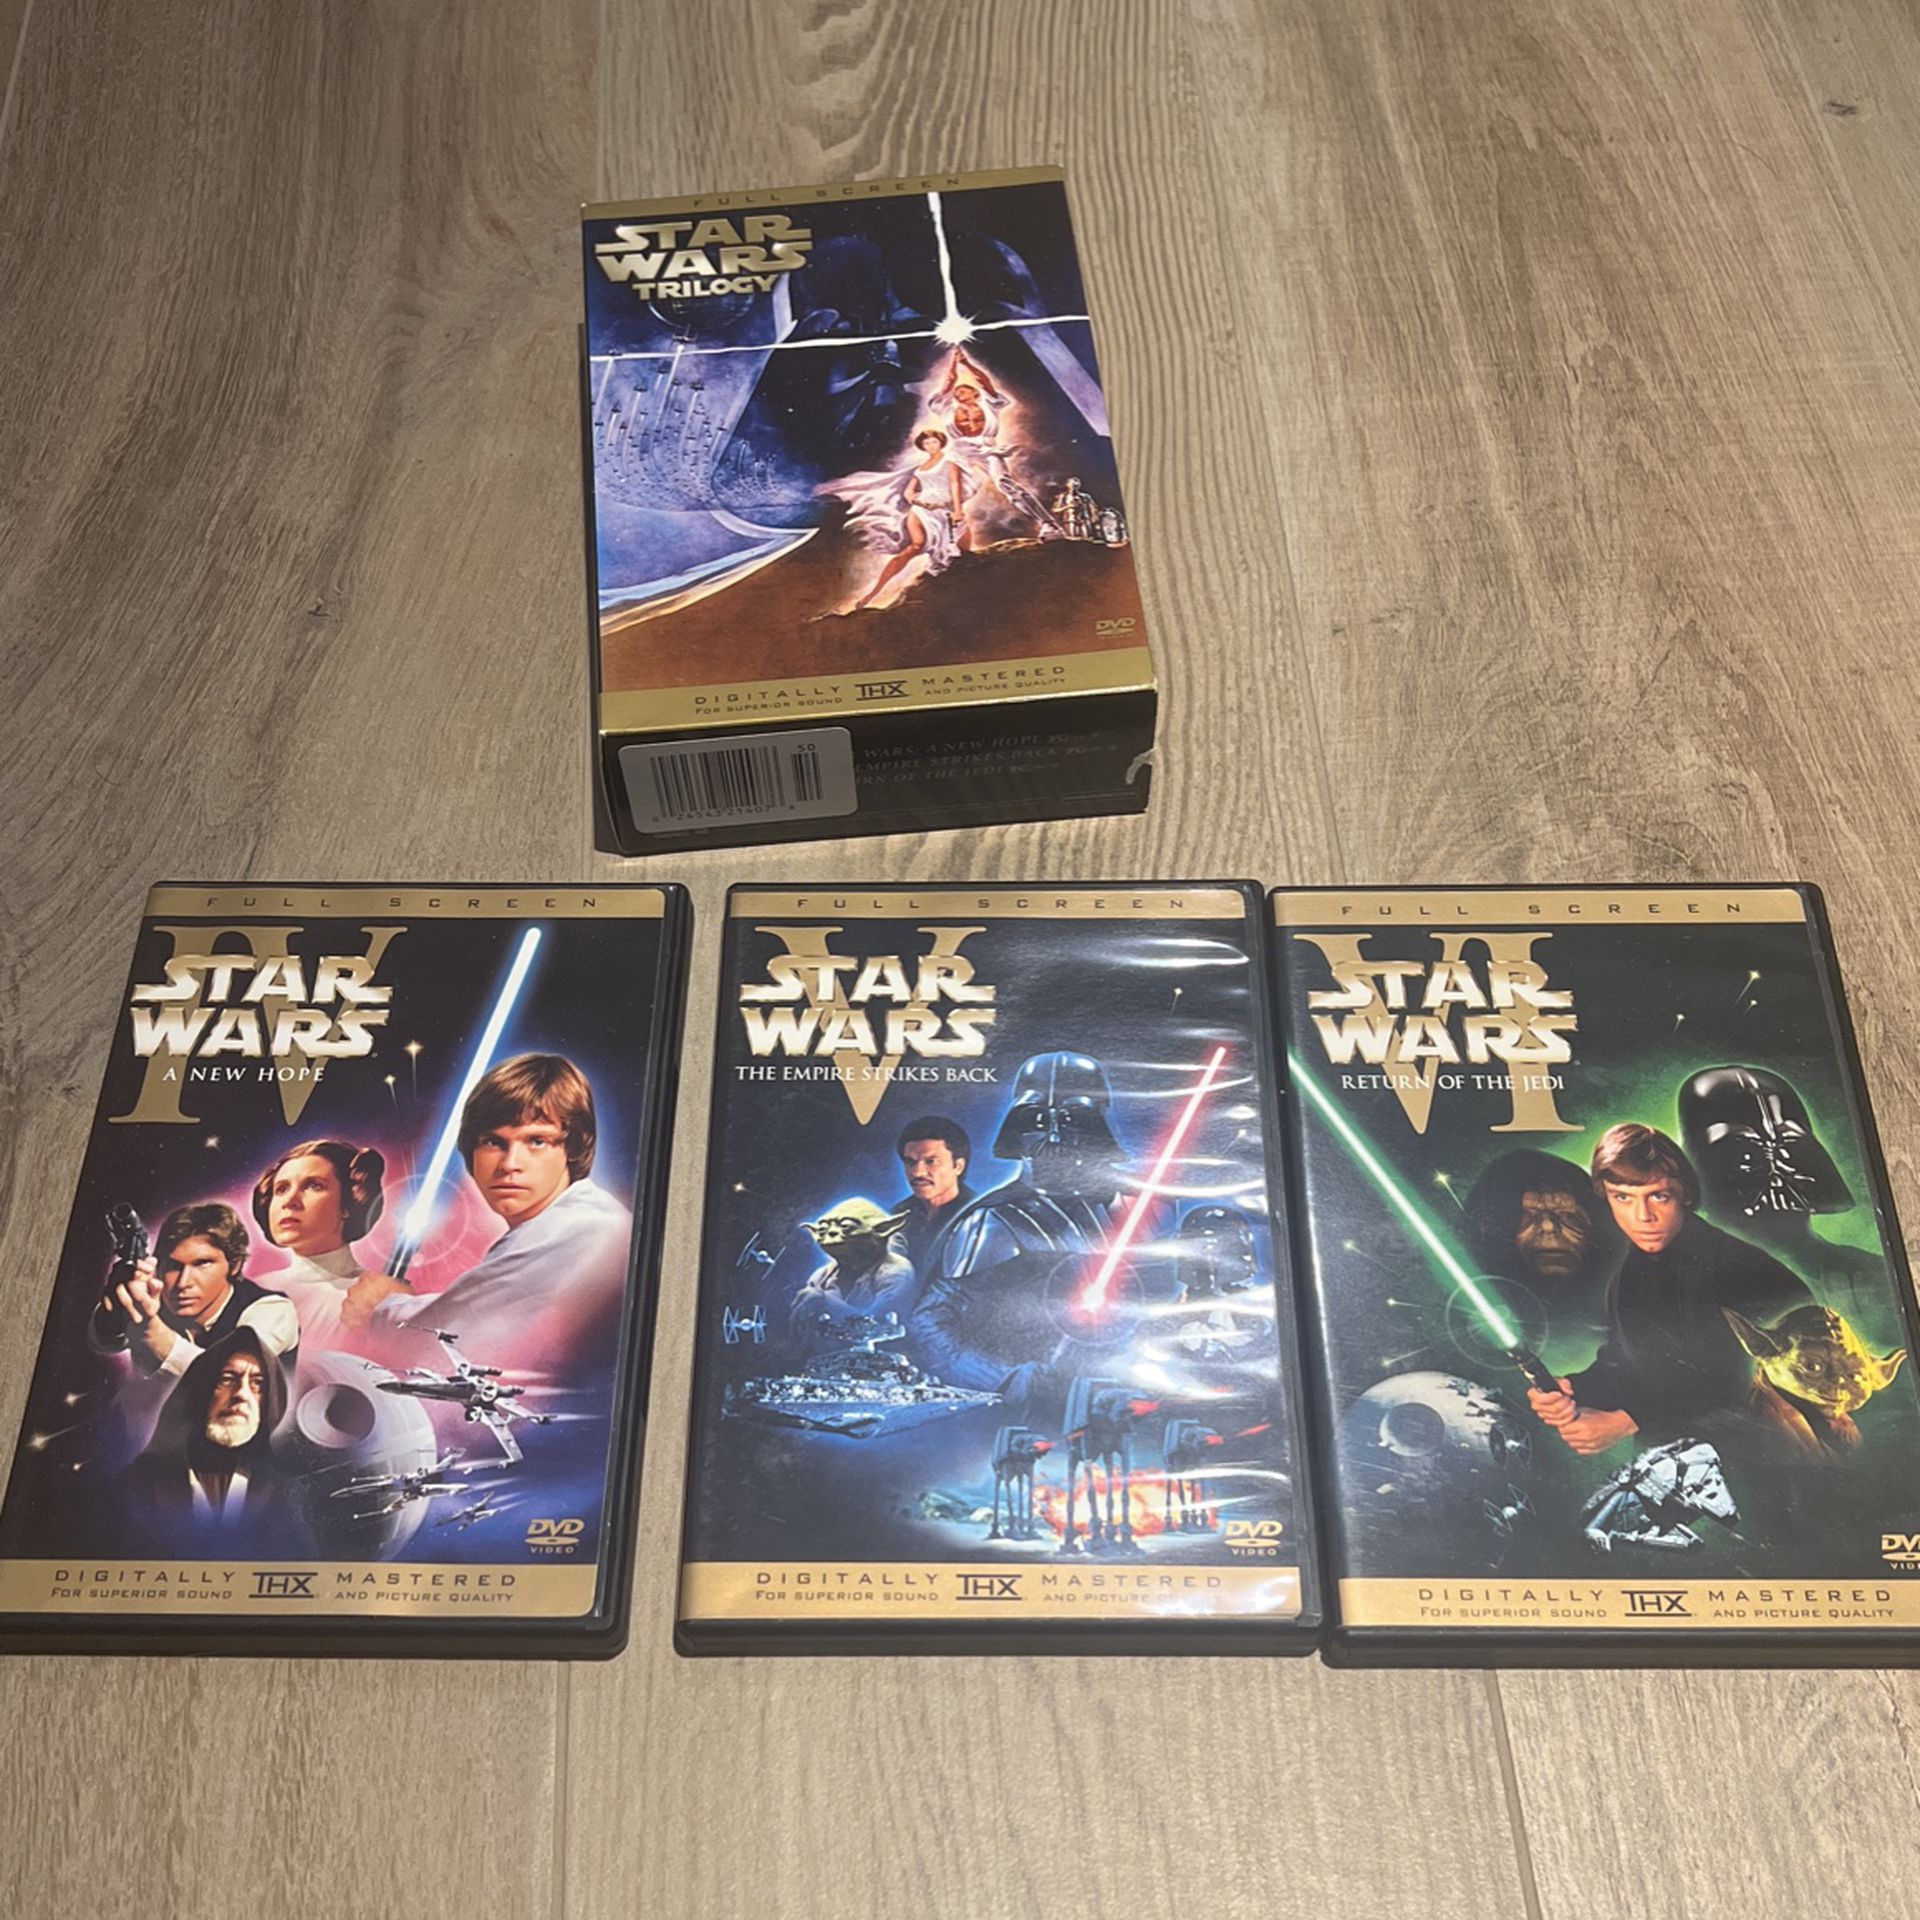 Star Wars Trilogy 4,5,6 DVD Collection